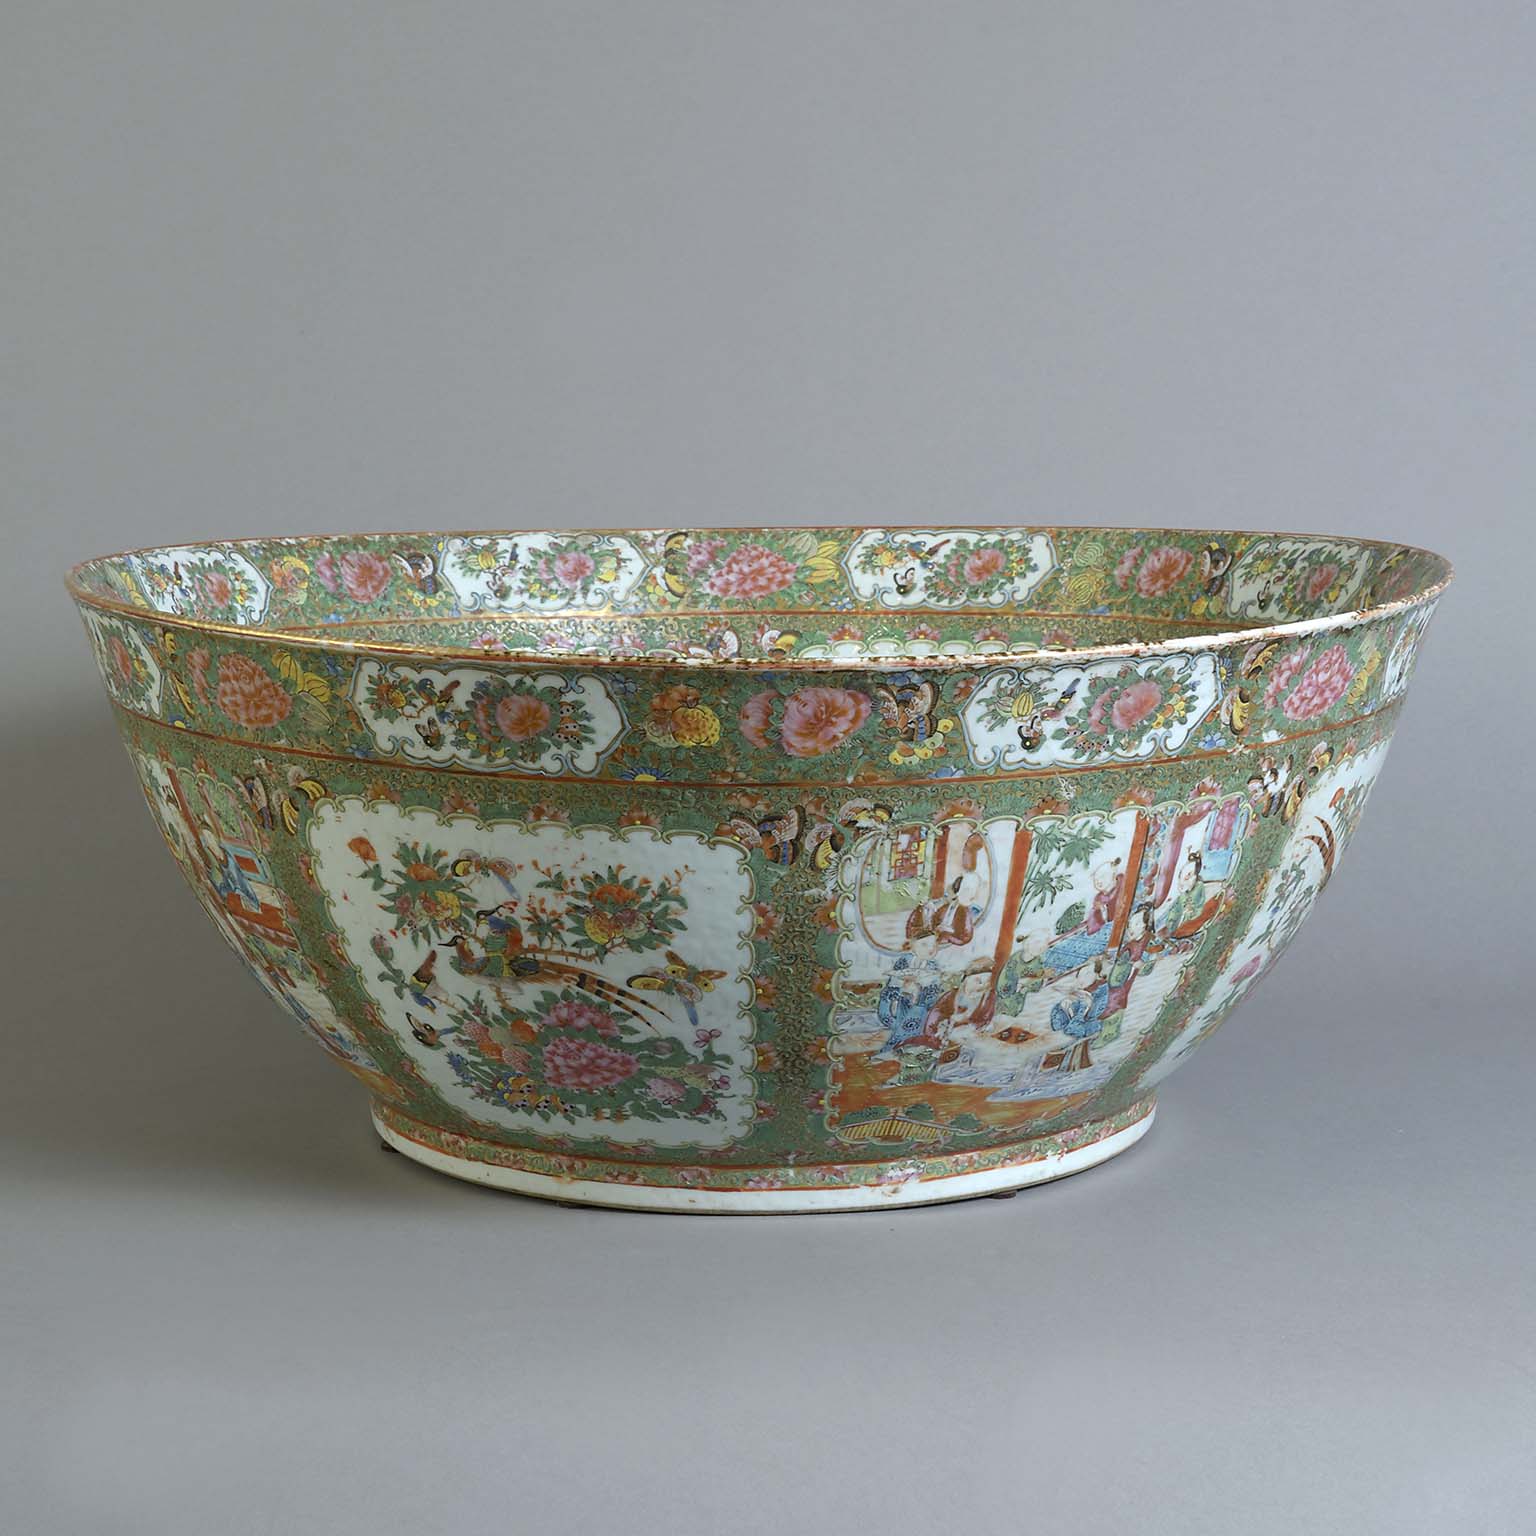 A Monumental Chinese Export Polychrome Porcelain Punch Bowl